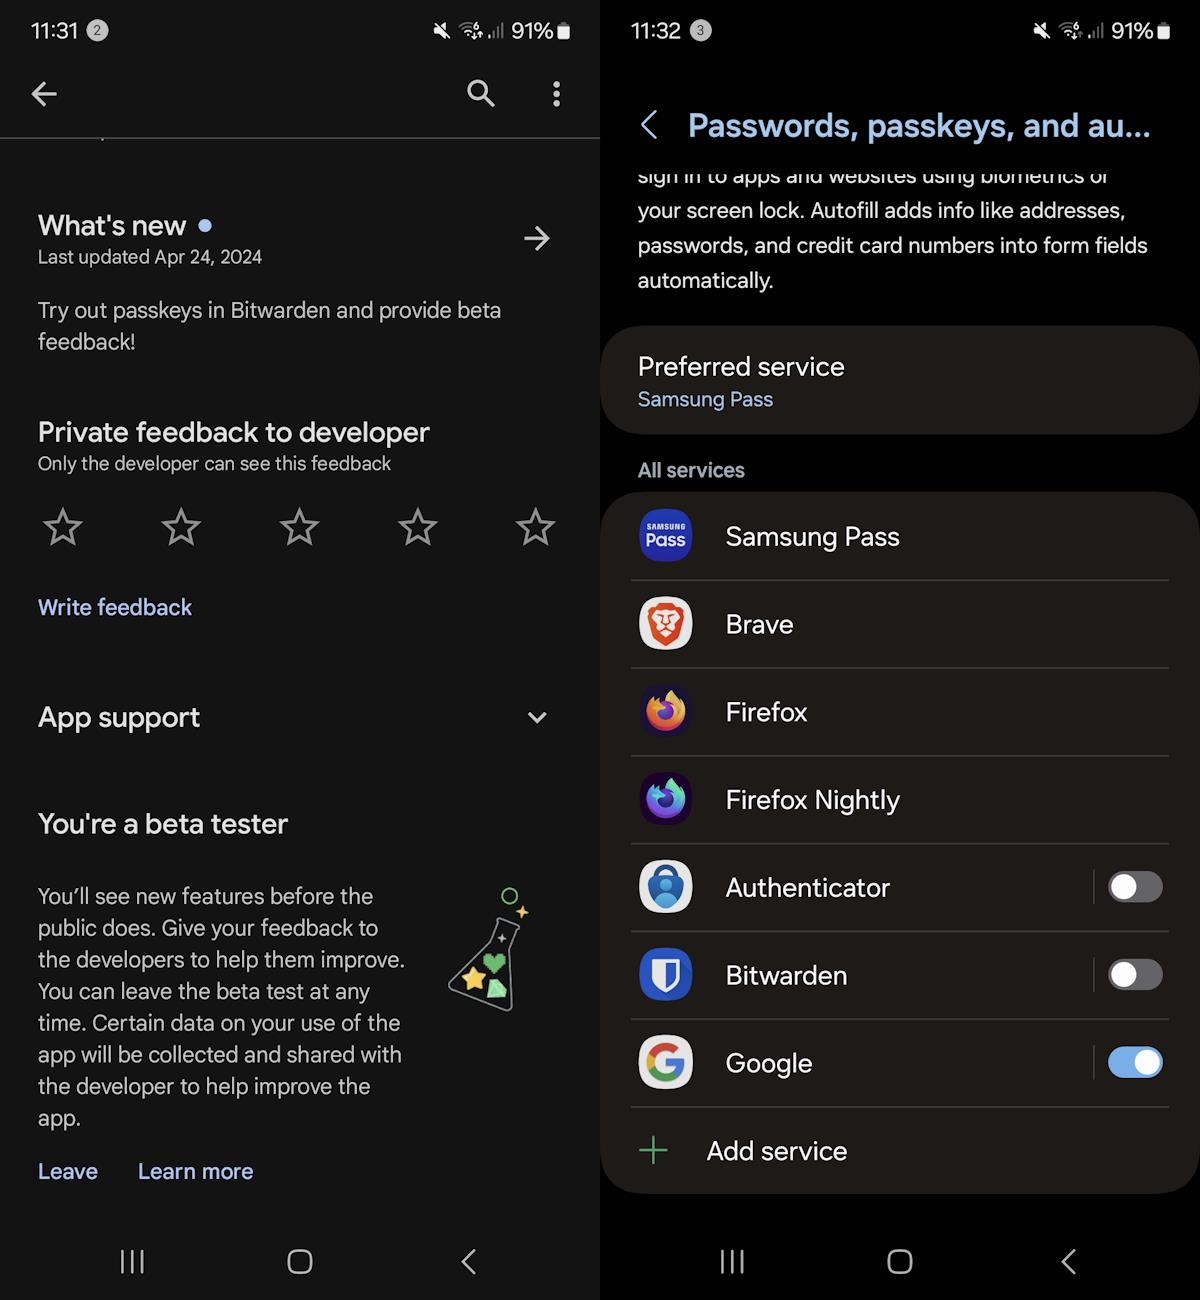 Bitwarden Password Manager brings Passkeys support for mobile